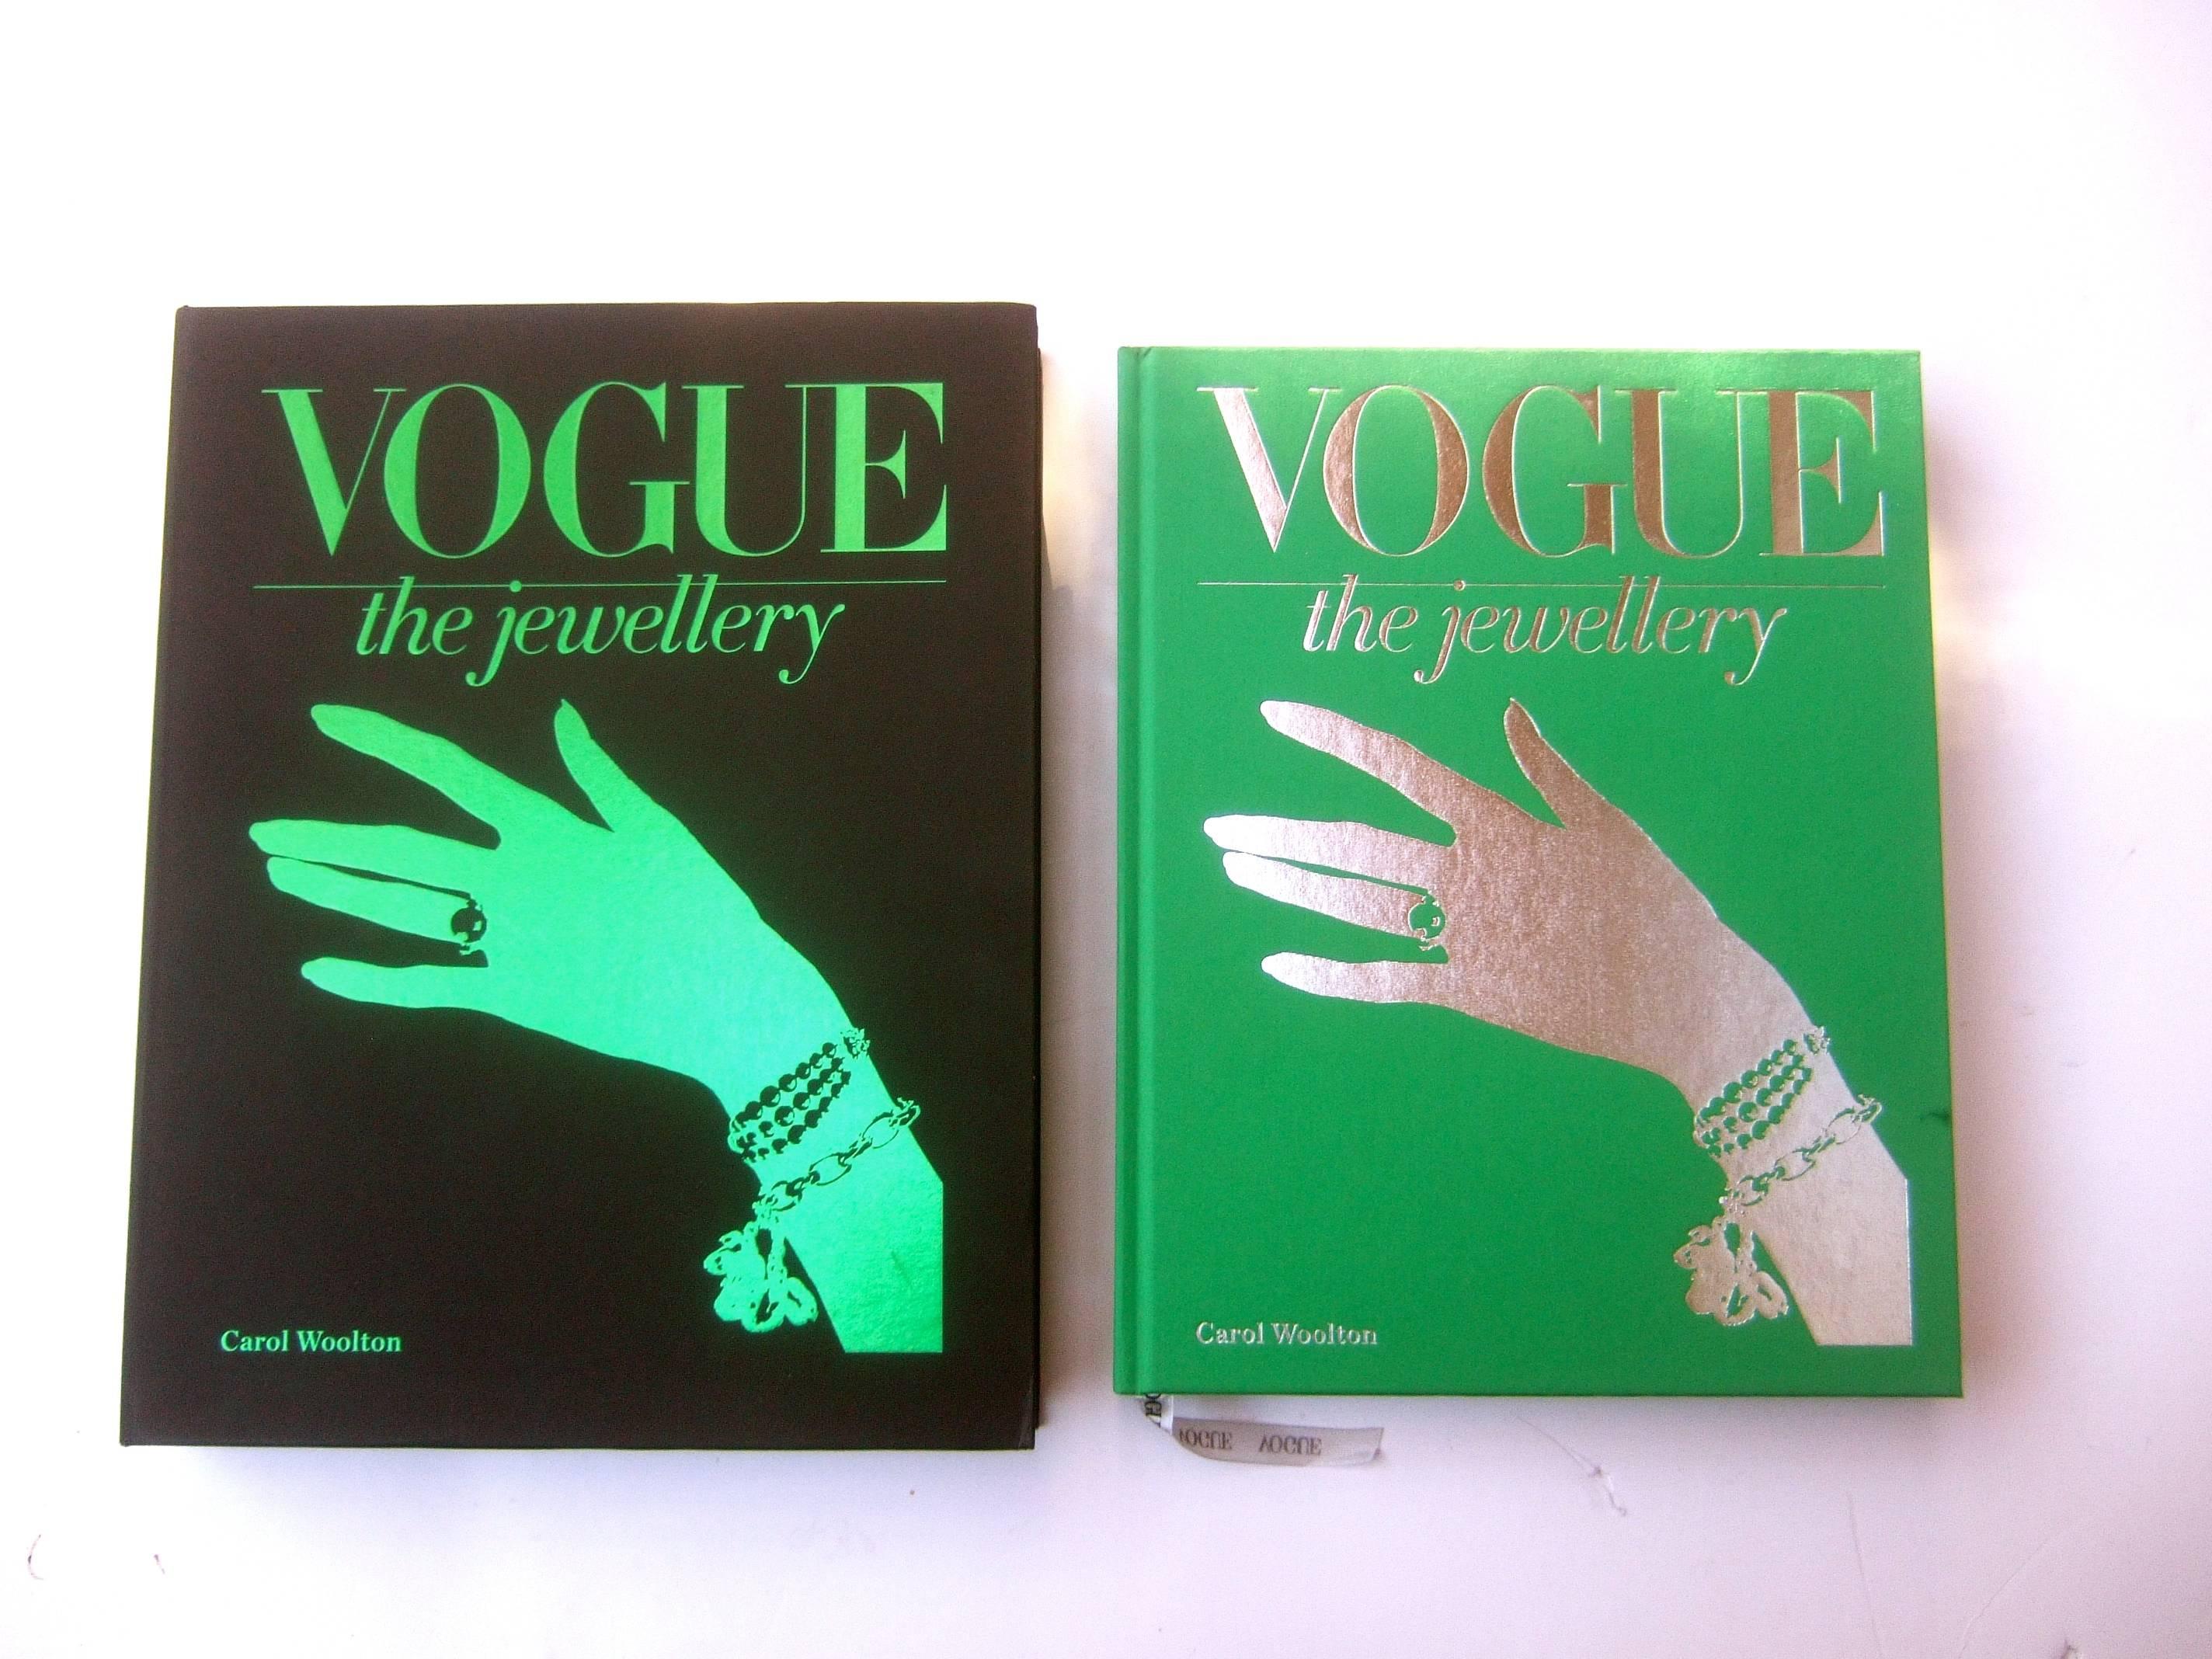 Vogue The Jewellry Hard book in the presentation box by Carol Woolton
The comprehensive book is an archive of Vogue's 20th century 
photographers; featuring a vast assortment of celebrities adorned
with an array of jewelry from the worlds preeminent